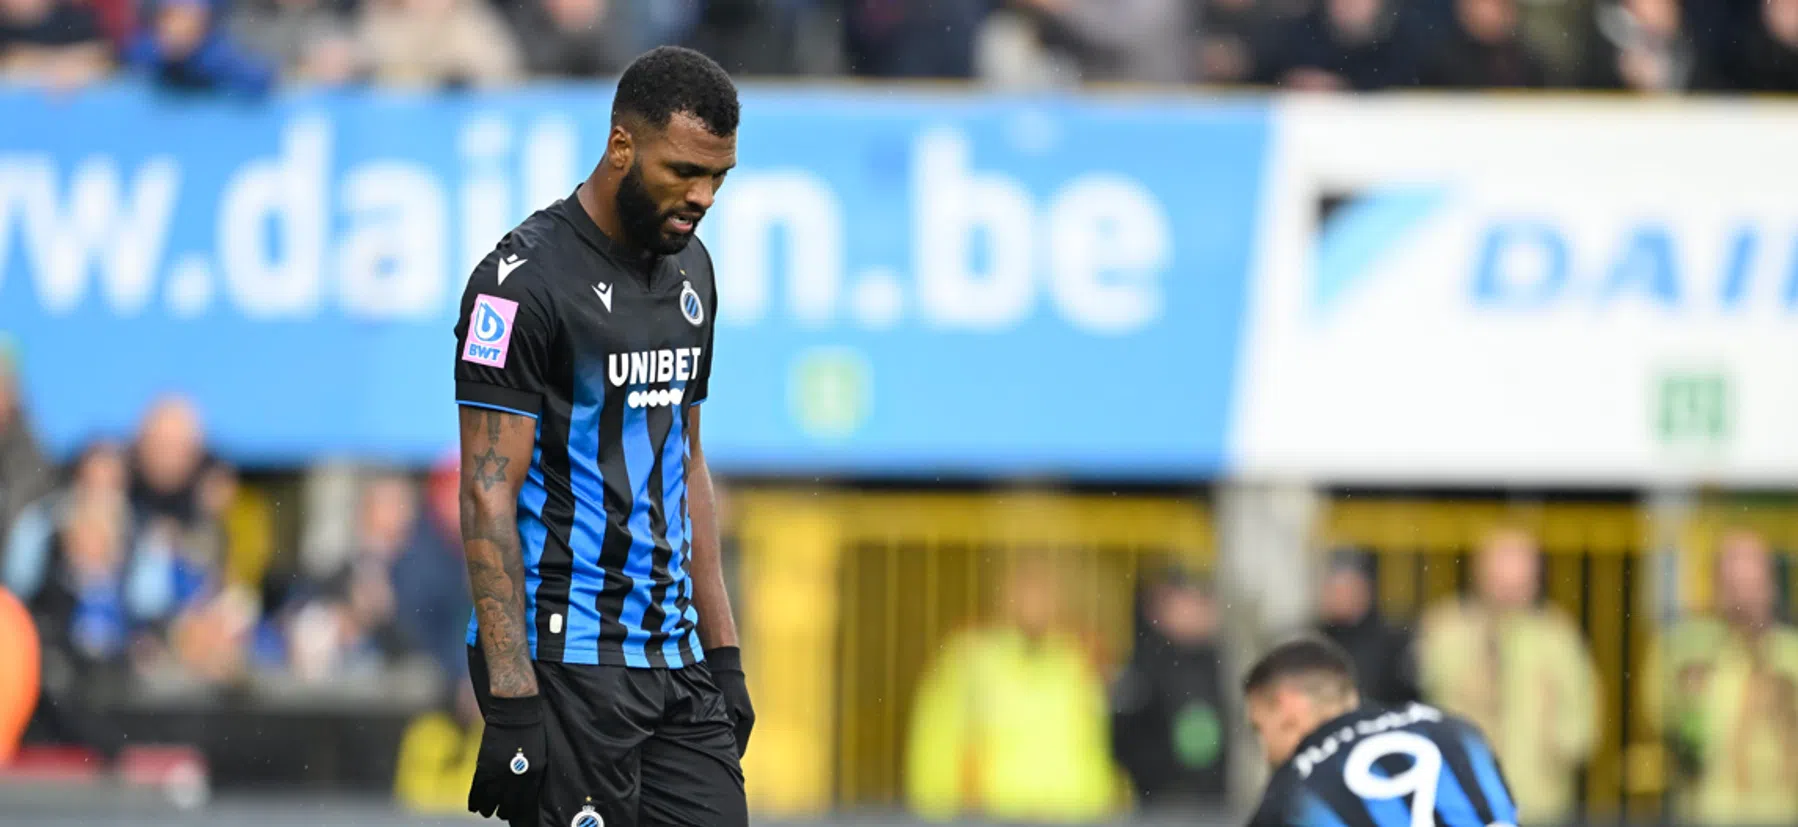 Pro League met ‘grapje’ over Club Brugge-spits